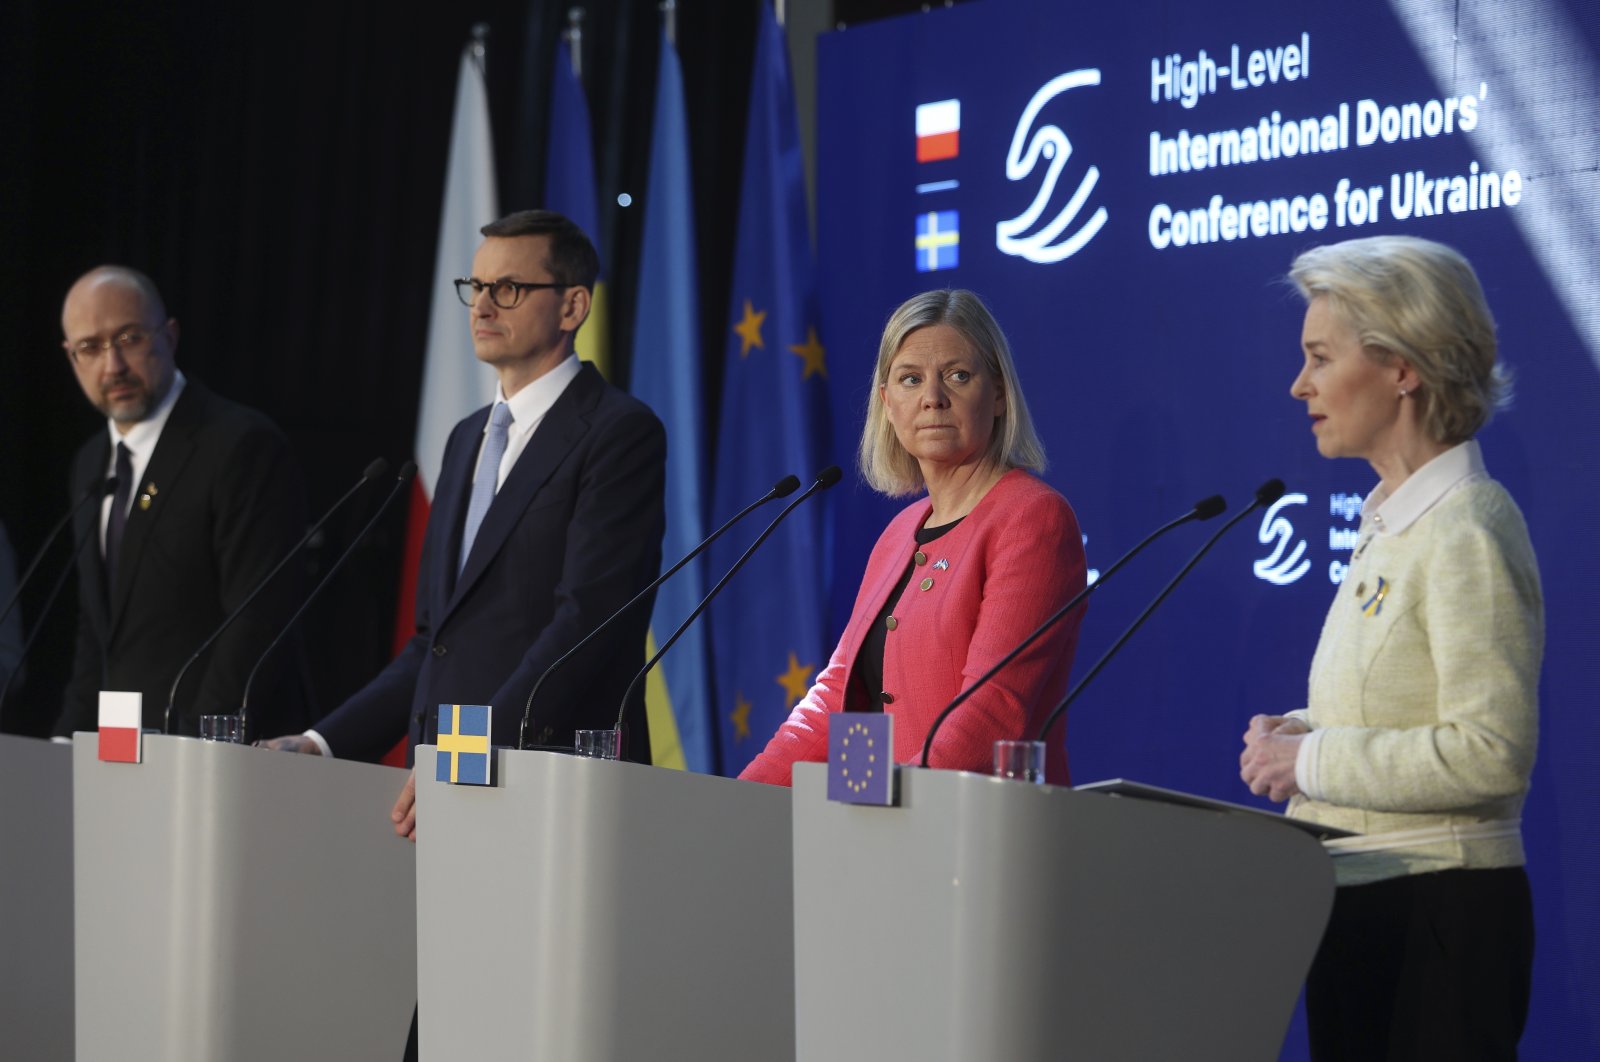 Ukrainian Prime Minister Denys Shmyhal, from left, Polish Prime Minister Mateusz Morawiecki, Swedish Prime Minister Magdalena Andersson and European Commission President Ursula von der Leyen attend a press conference after the High-Level International Donor&#039;s Conference for Ukraine at the National Stadium in Warsaw, Poland, Thursday, May 5, 2022. (AP Photo)